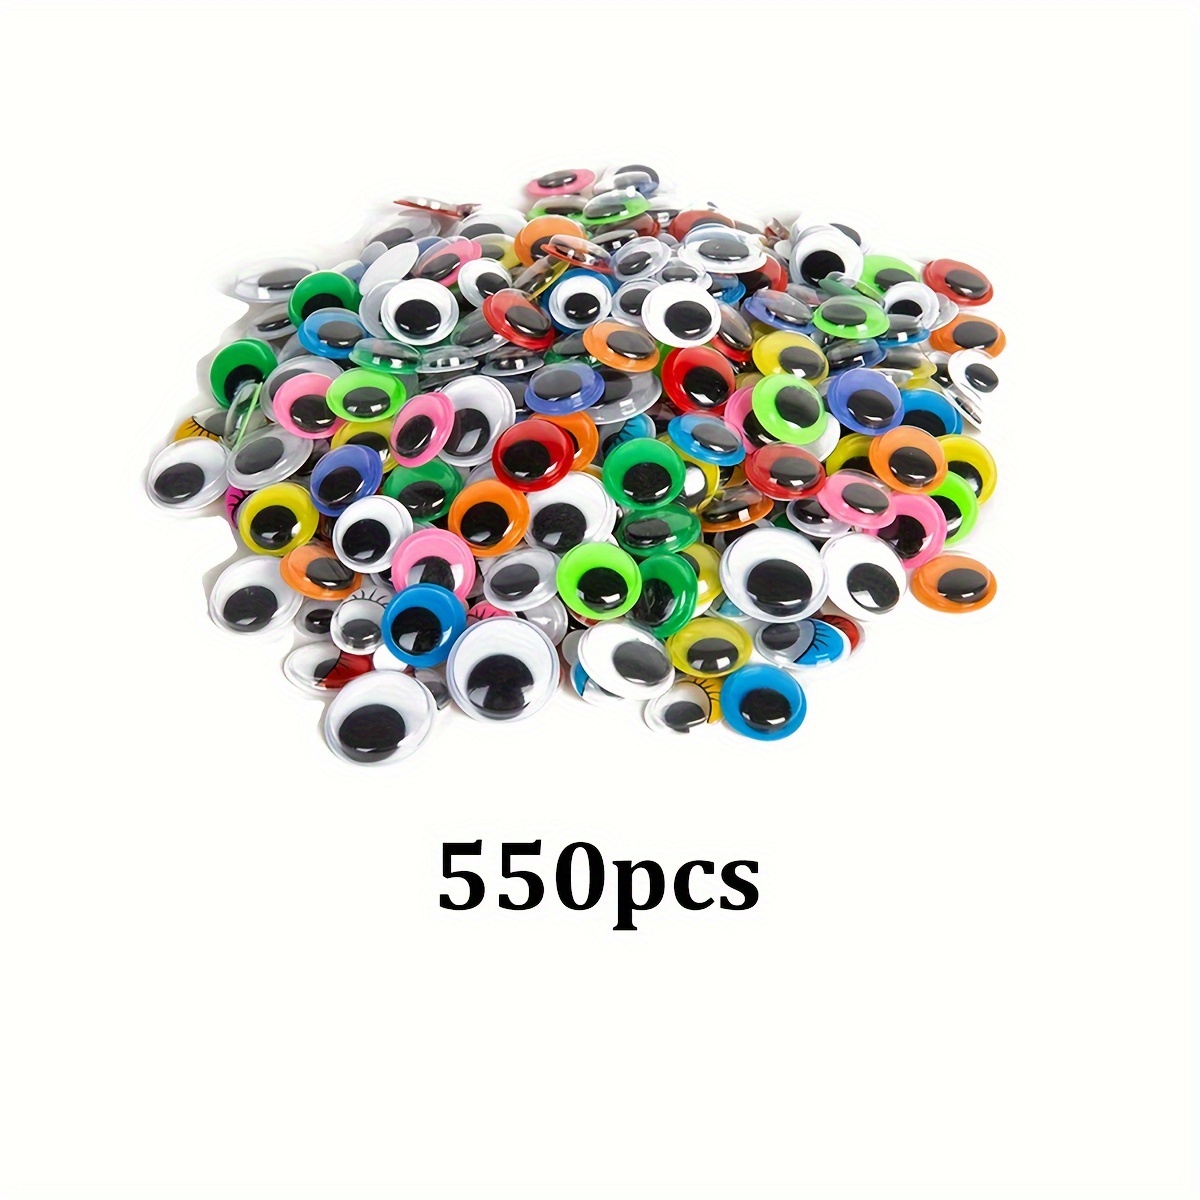 Colorful Self Adhesive Wiggle Eyes for Crafts